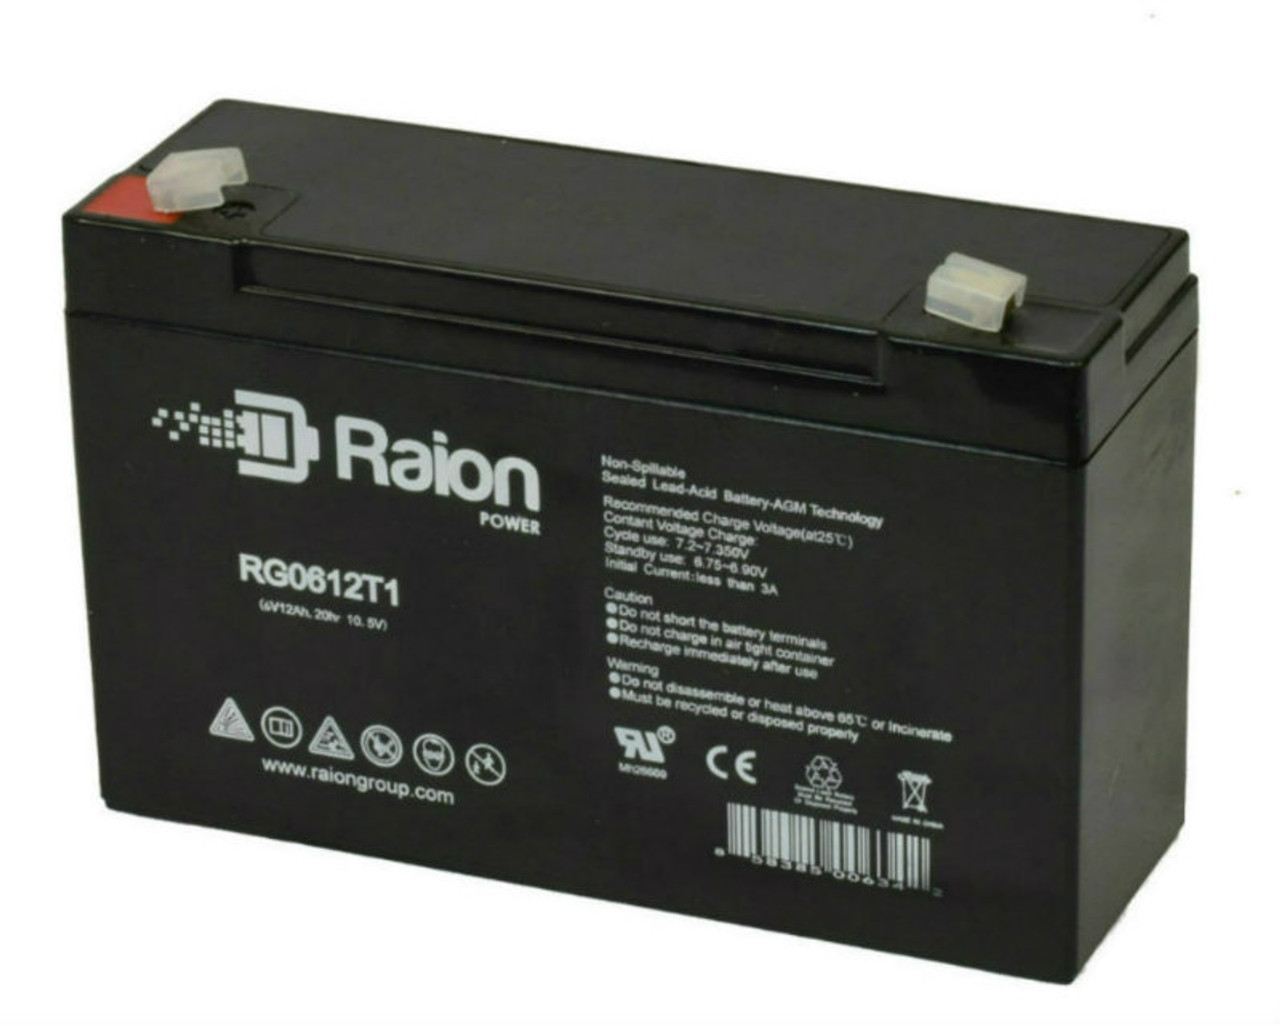 Raion Power RG06120T1 Replacement 6V 12Ah Emergency Light Battery for Chloride 100-001-0136